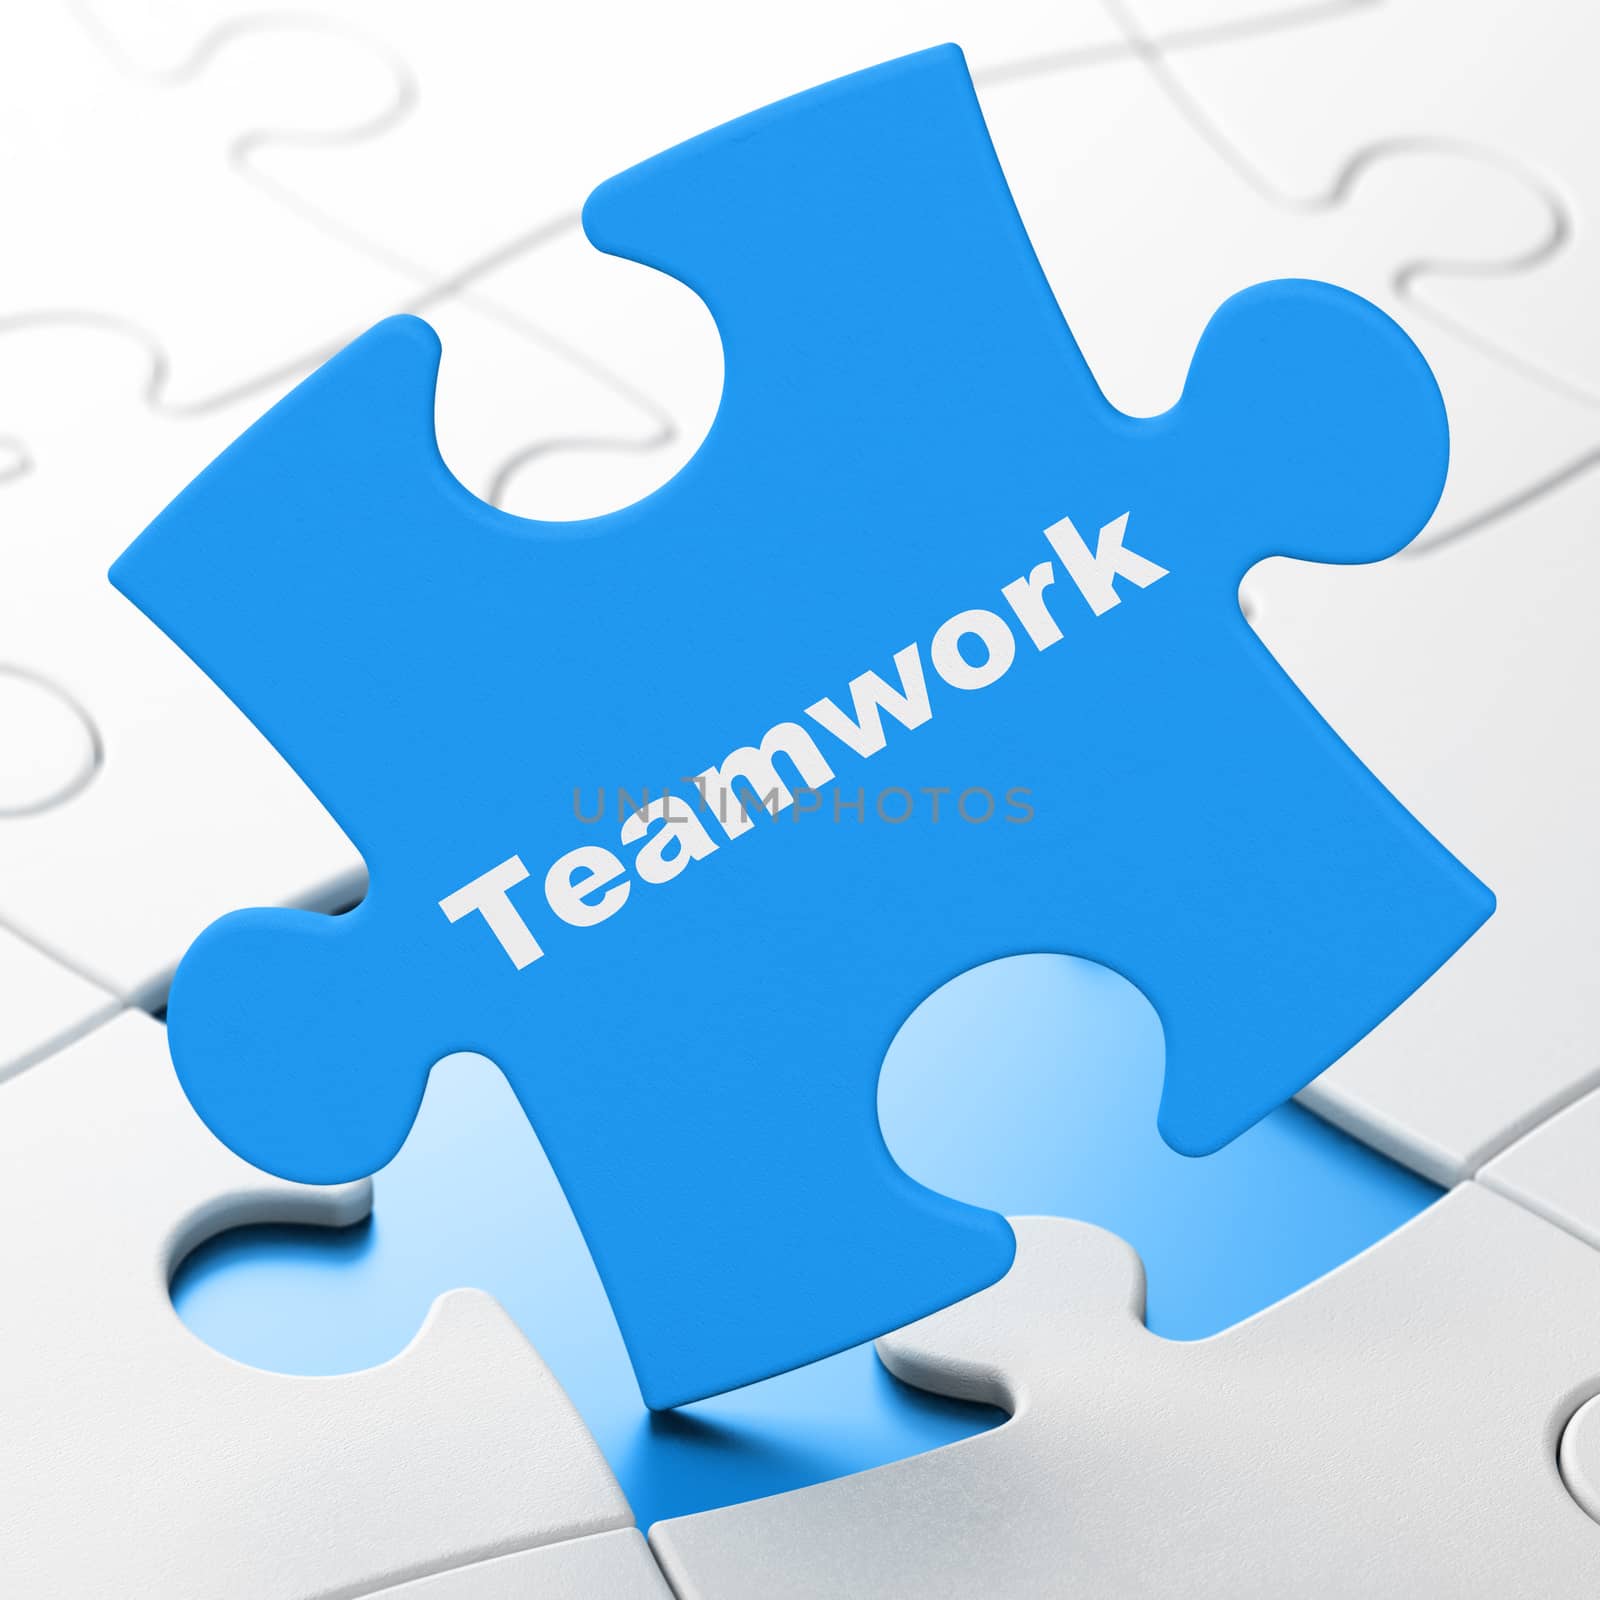 Business concept: Teamwork on puzzle background by maxkabakov